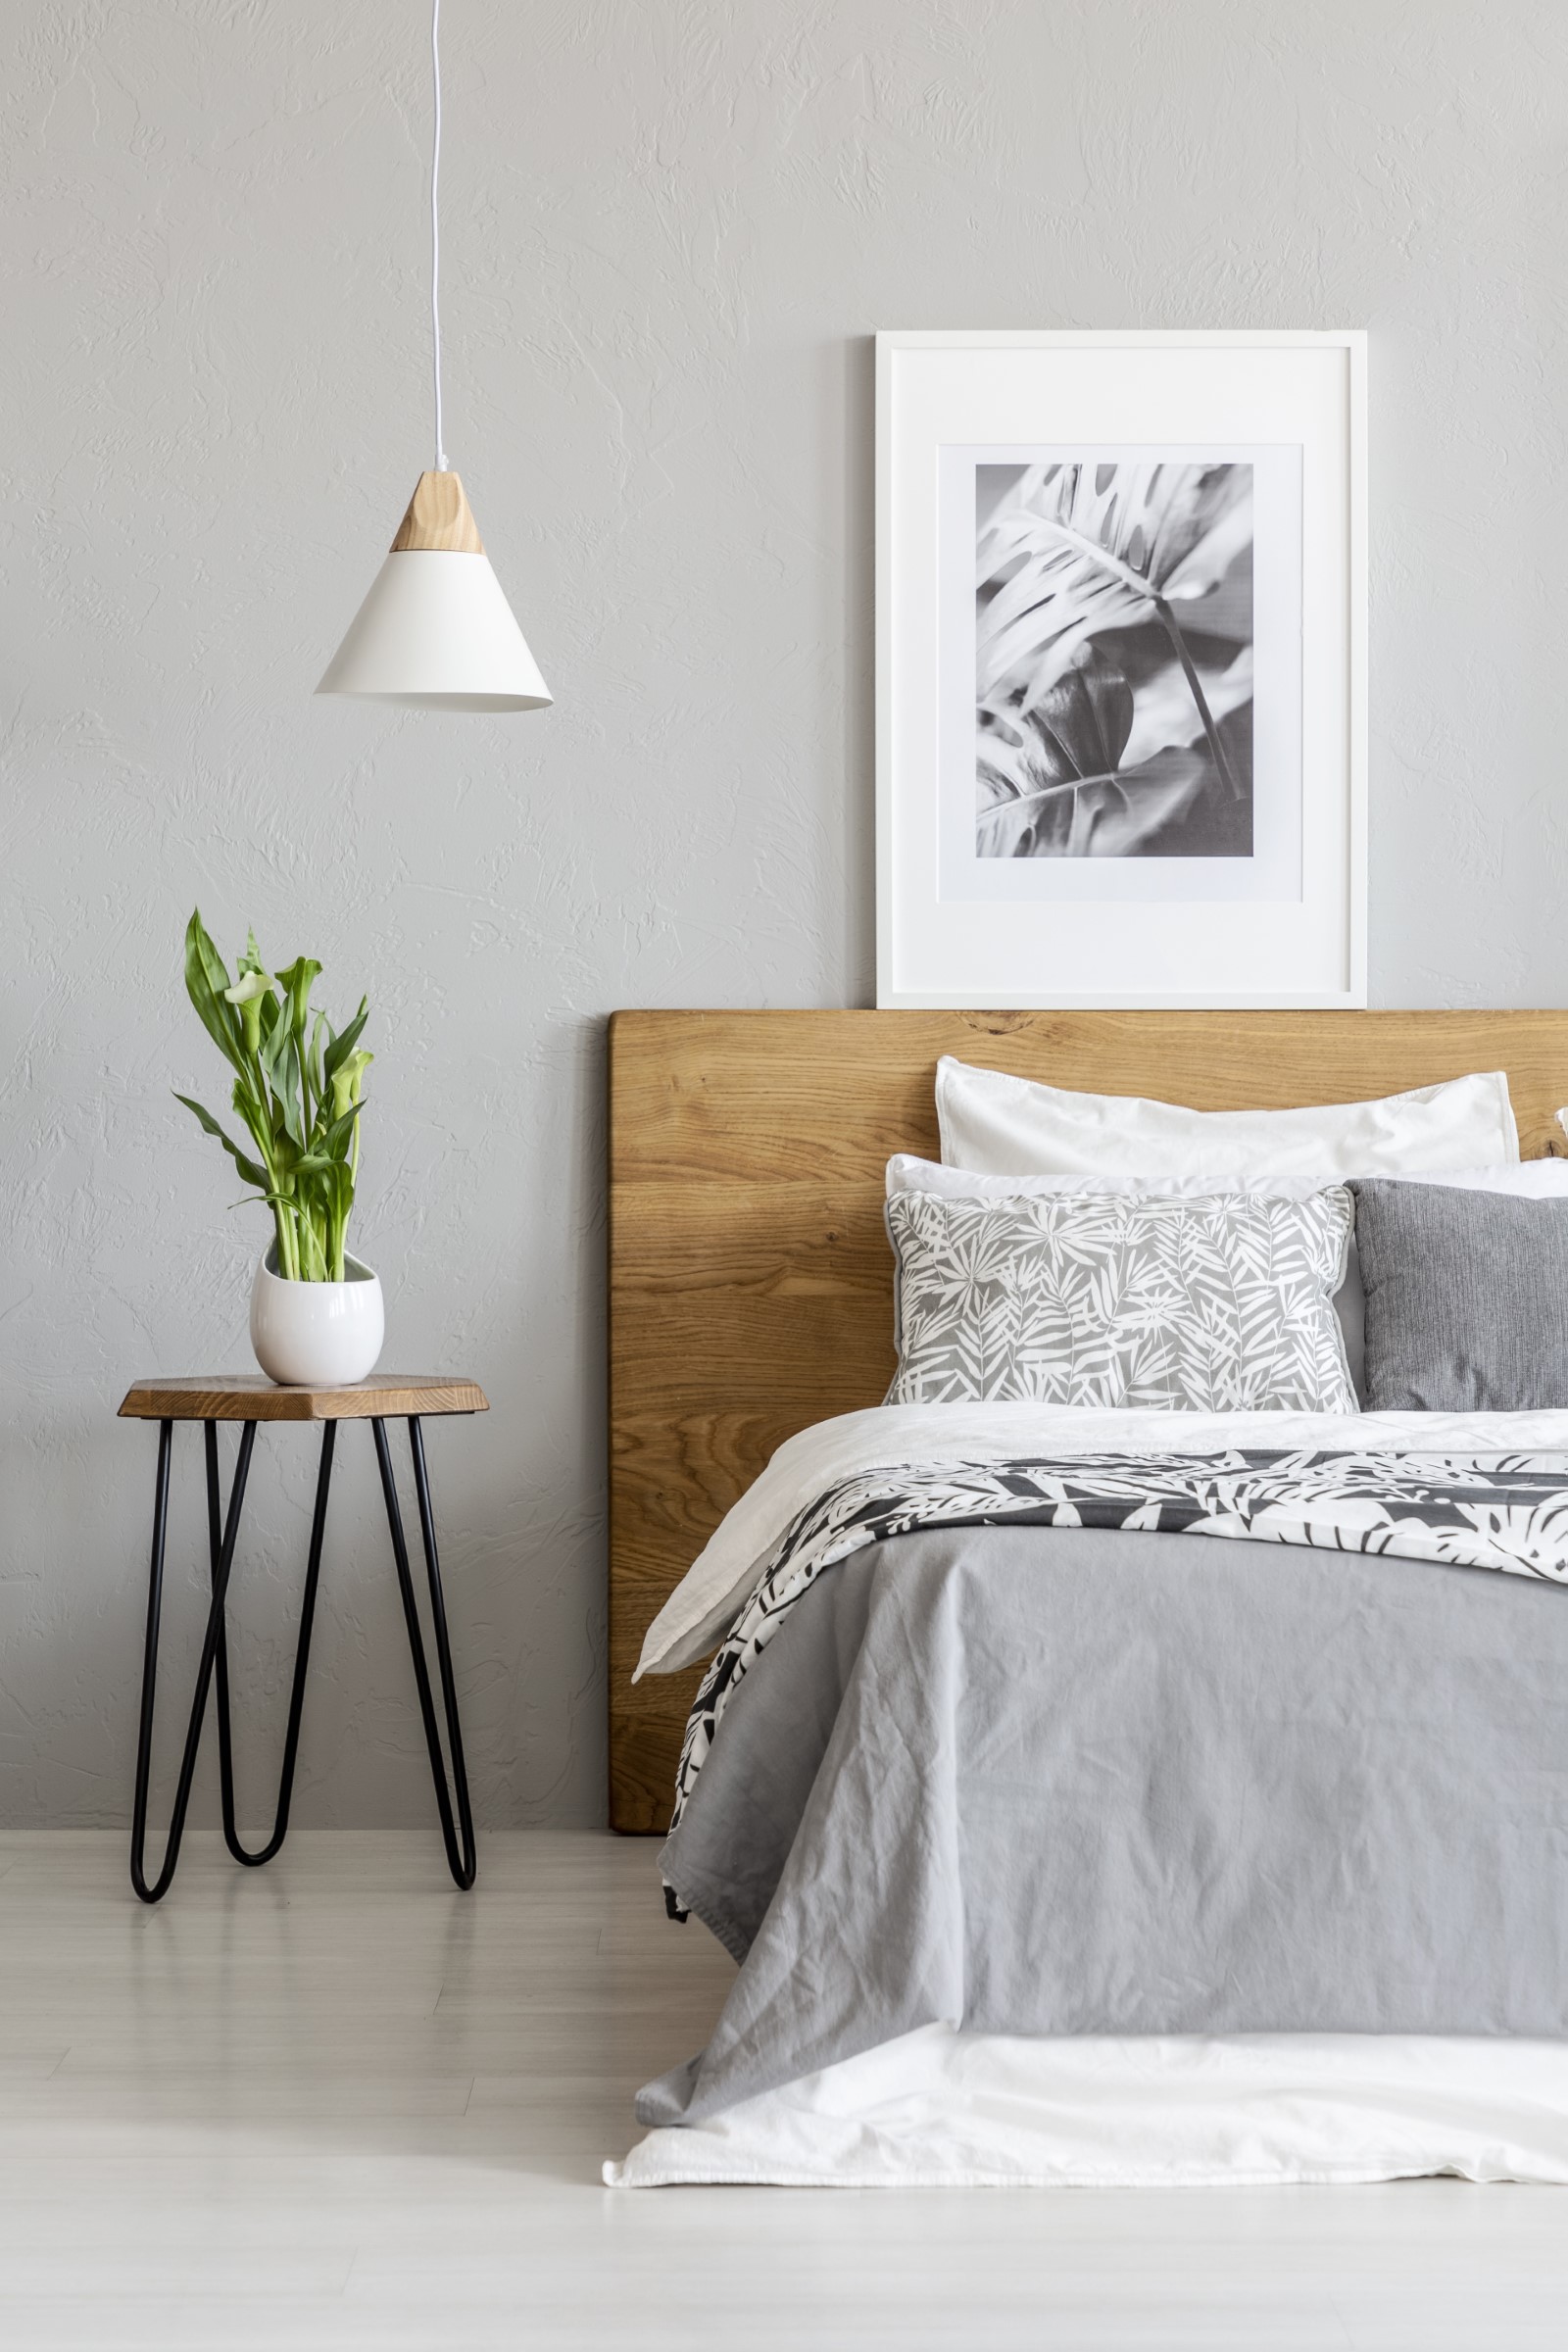 plant-on-table-next-to-wooden-bed-in-grey-bedroom-QB7WPCA.jpg